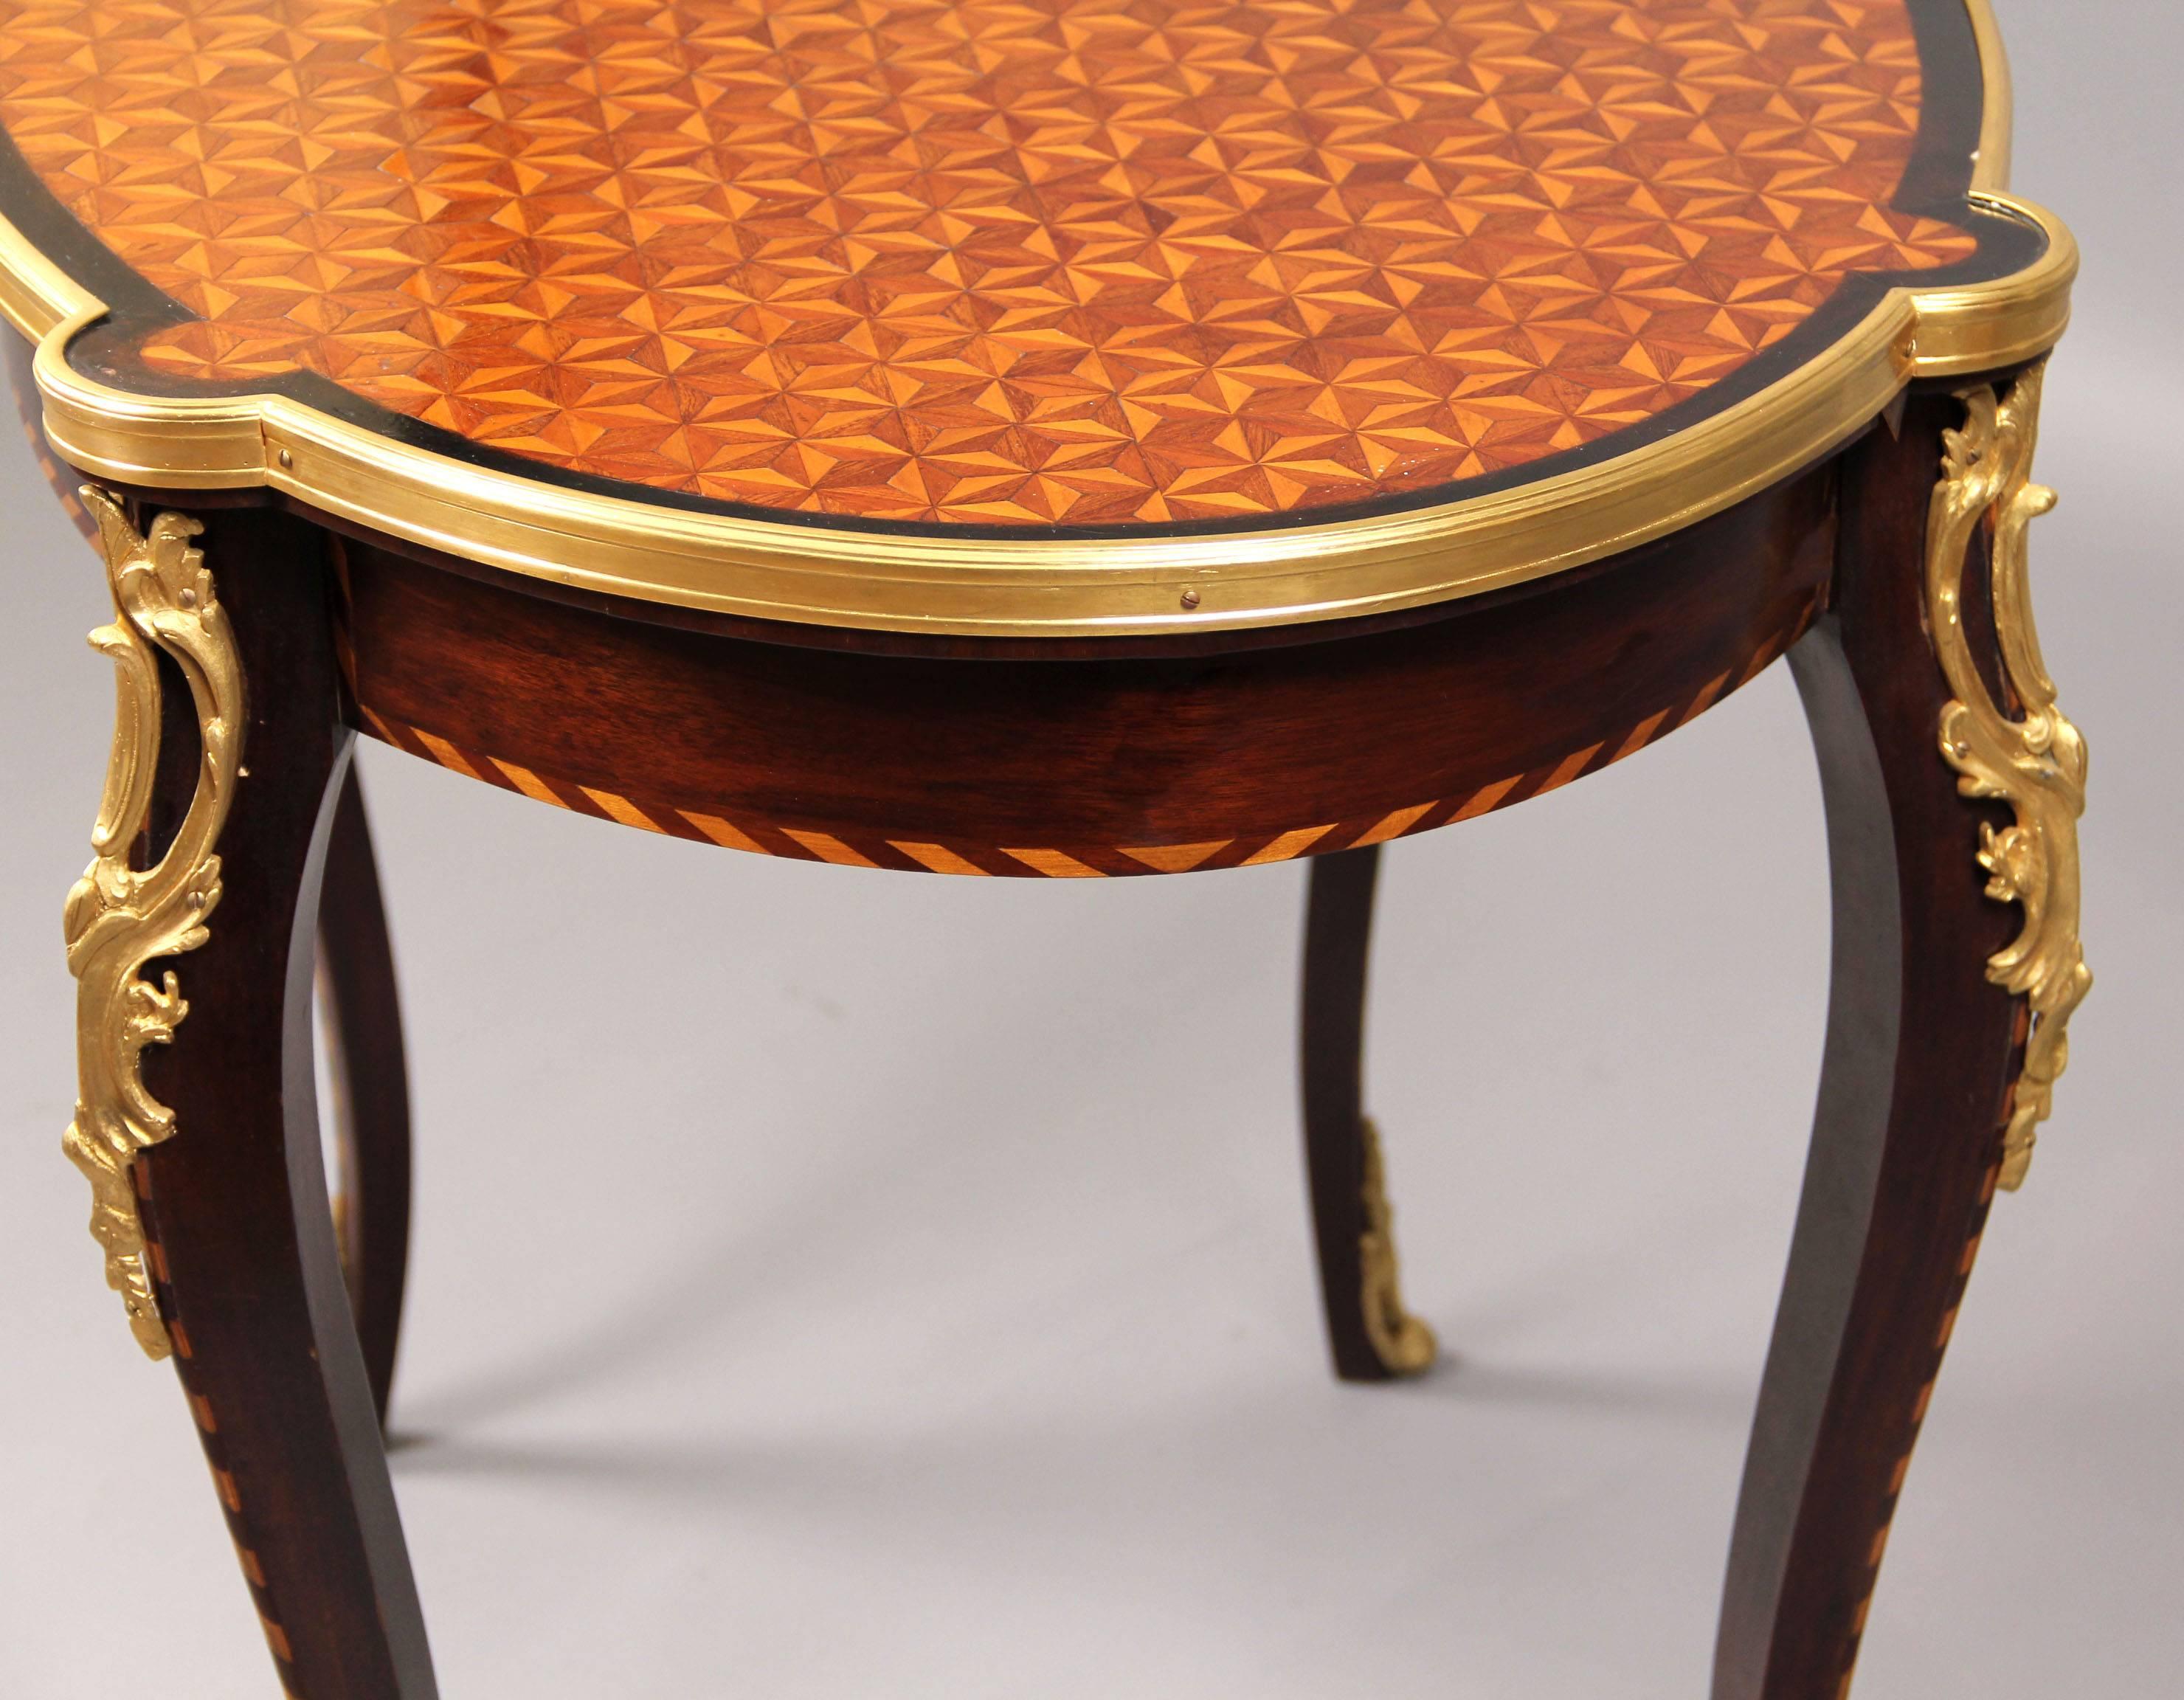 Late 19th century Louis XV style gilt bronze mounted parquetry-top center table.

Oval parquetry-top raised by bronze mounted cabriole legs.